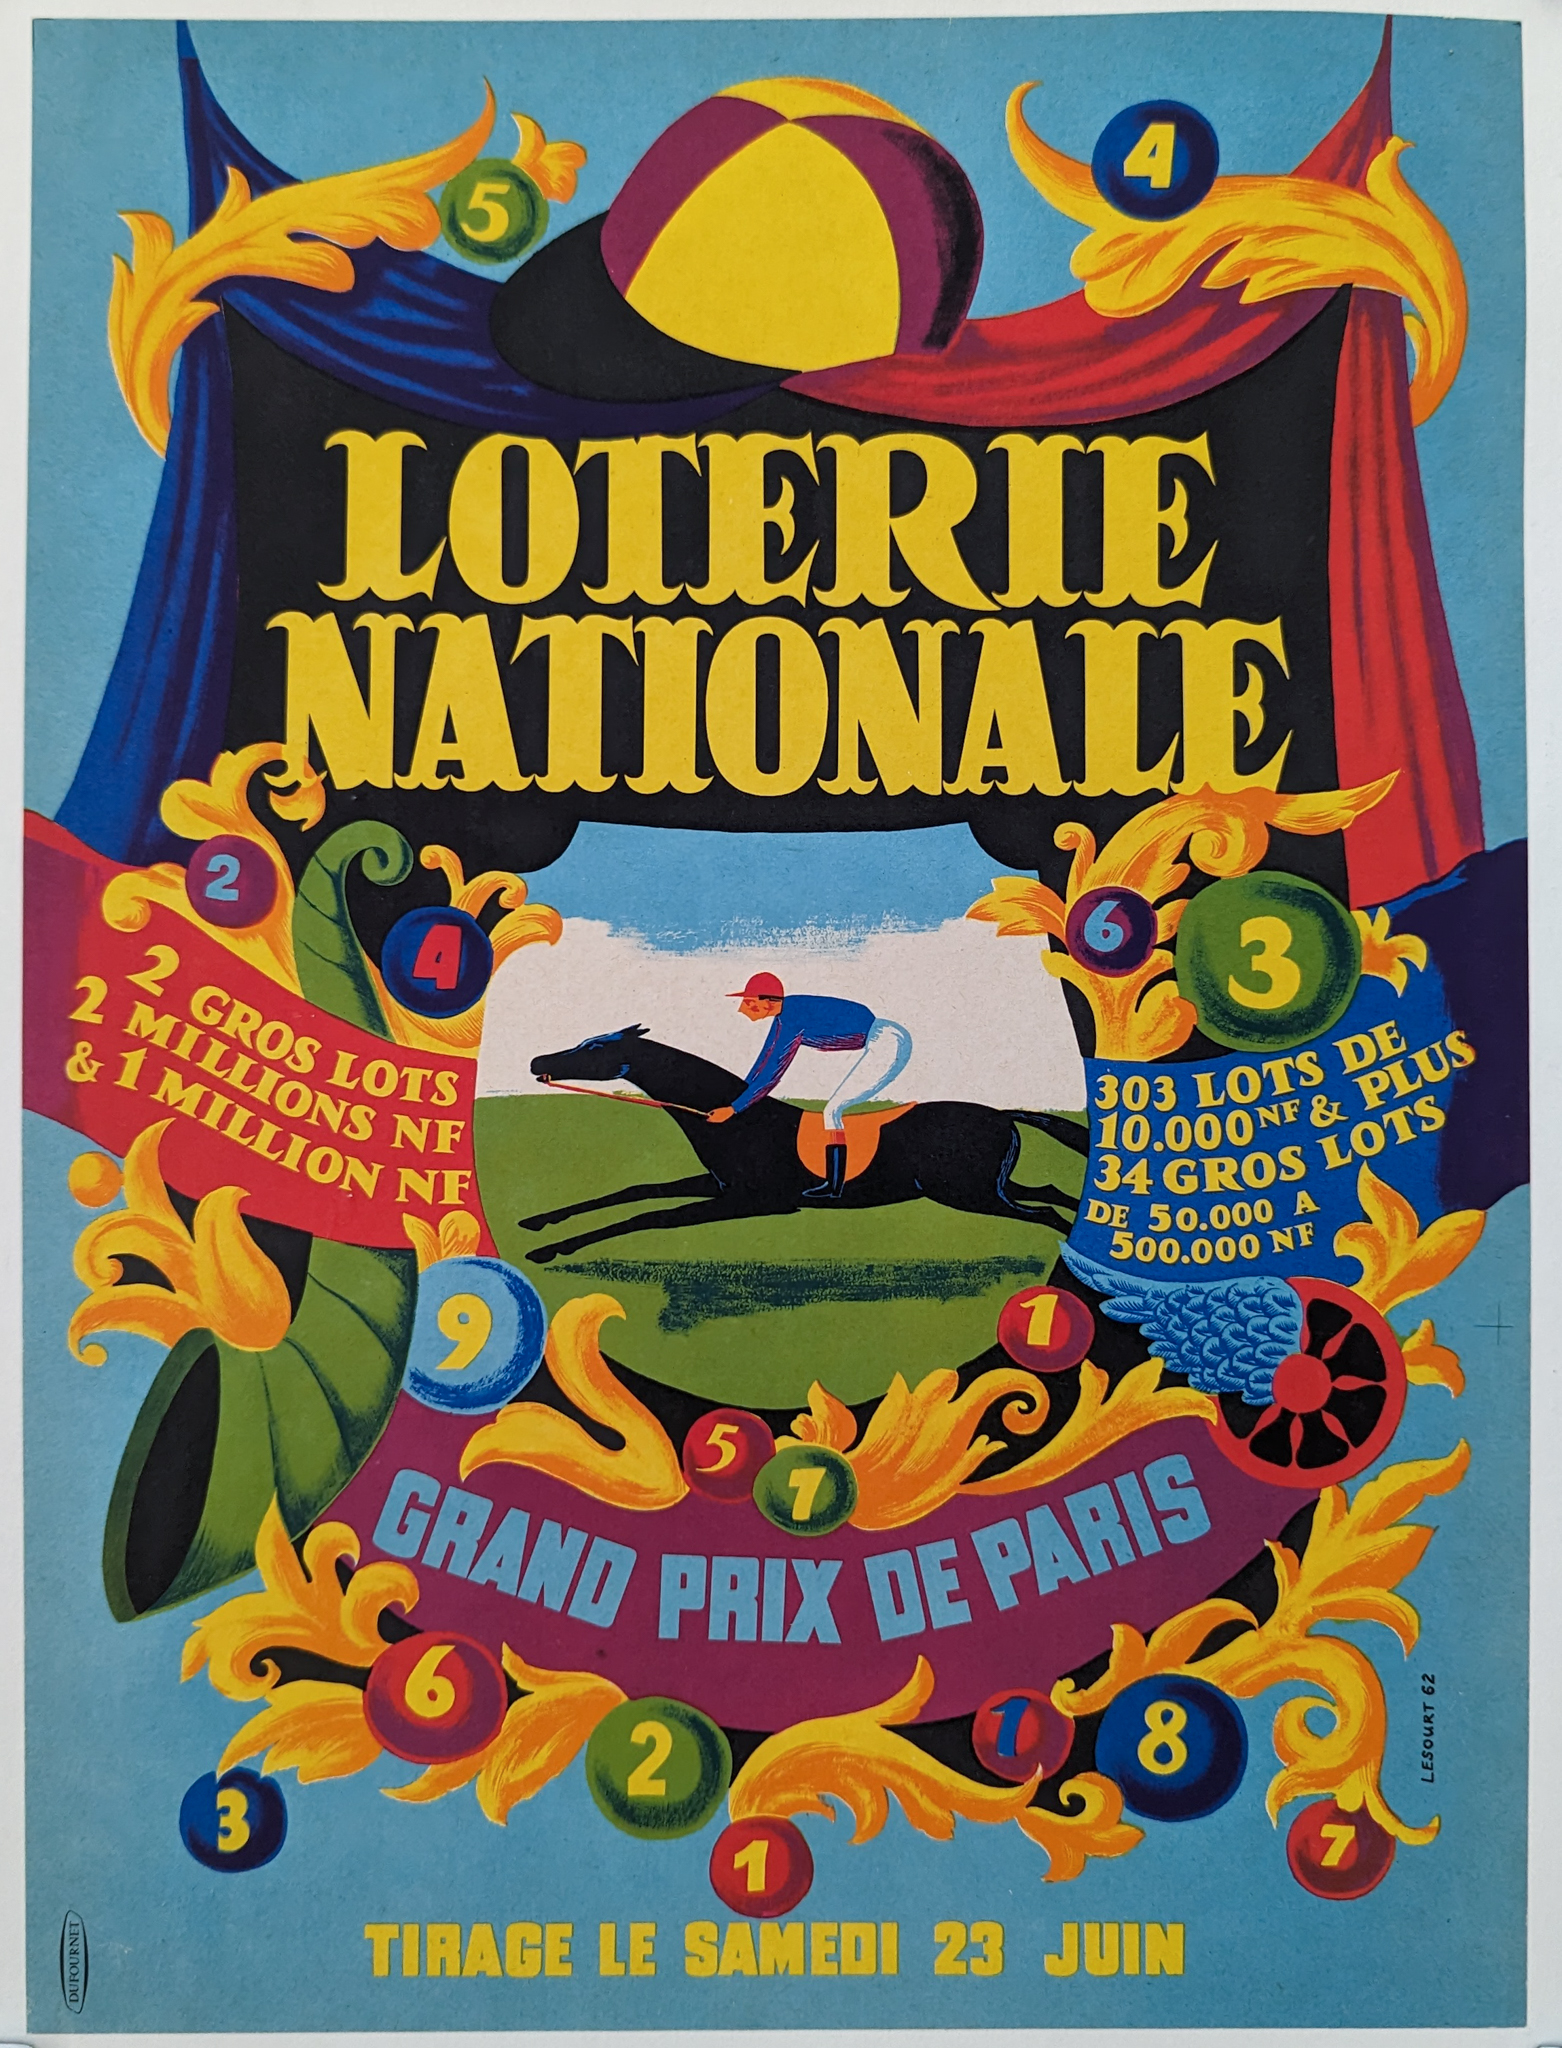 Lottery National | The Art Syndicate